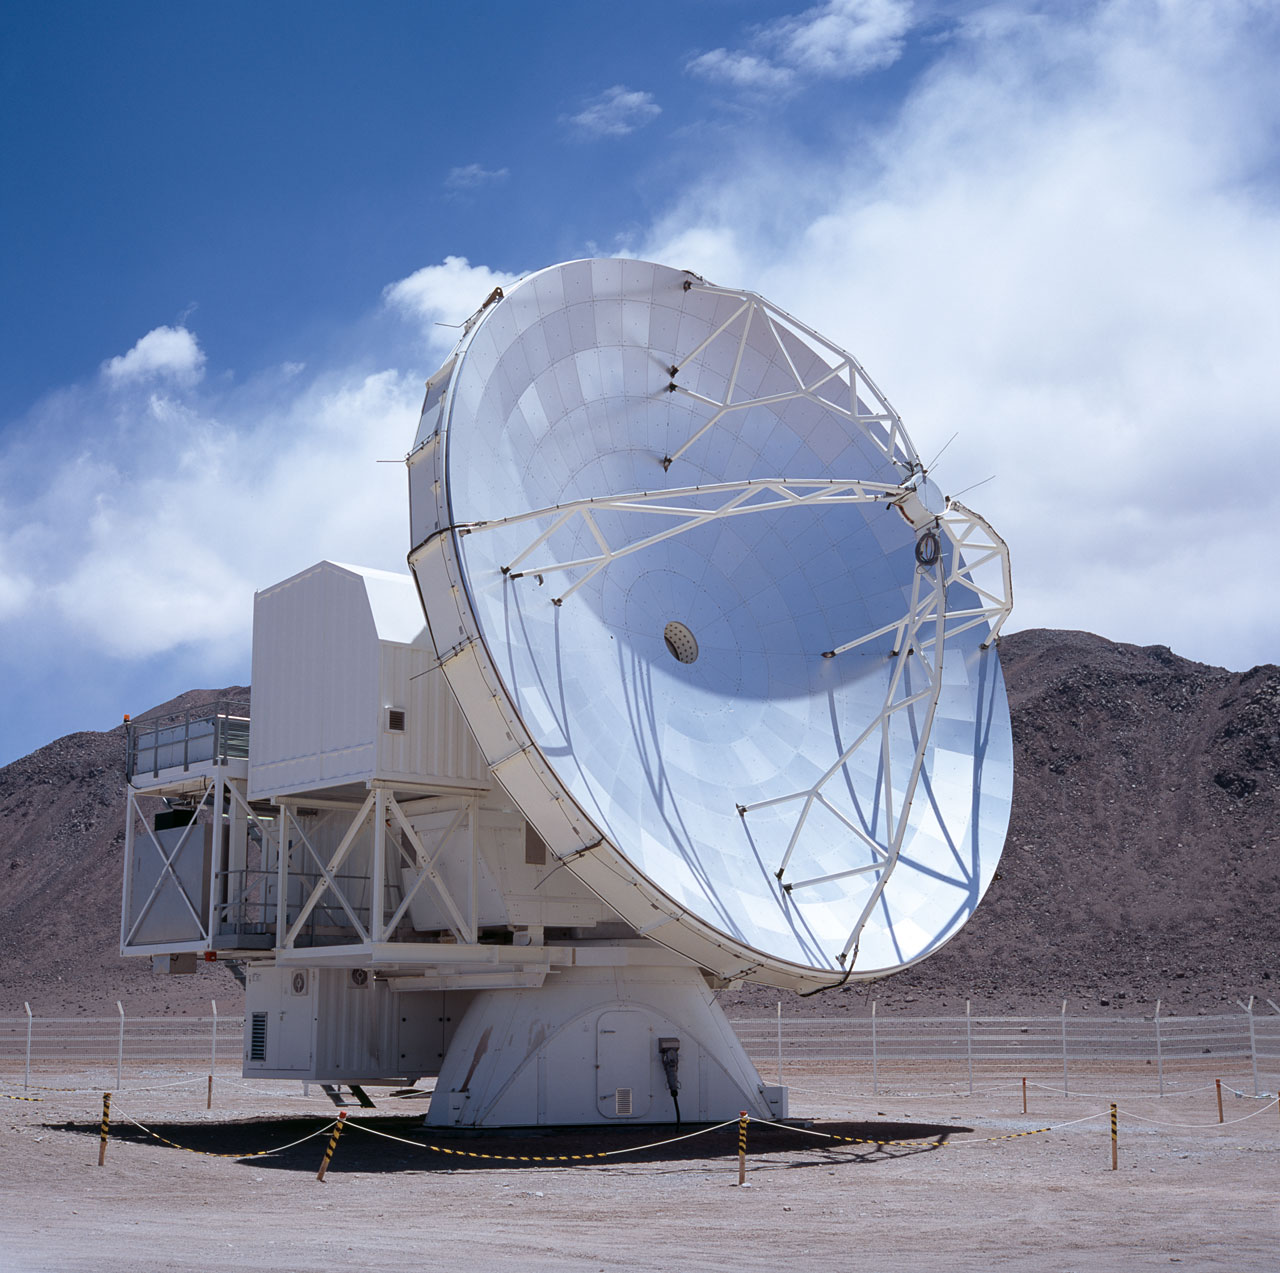 News - Lunar eclipse observed with a radio telescope - ALMA